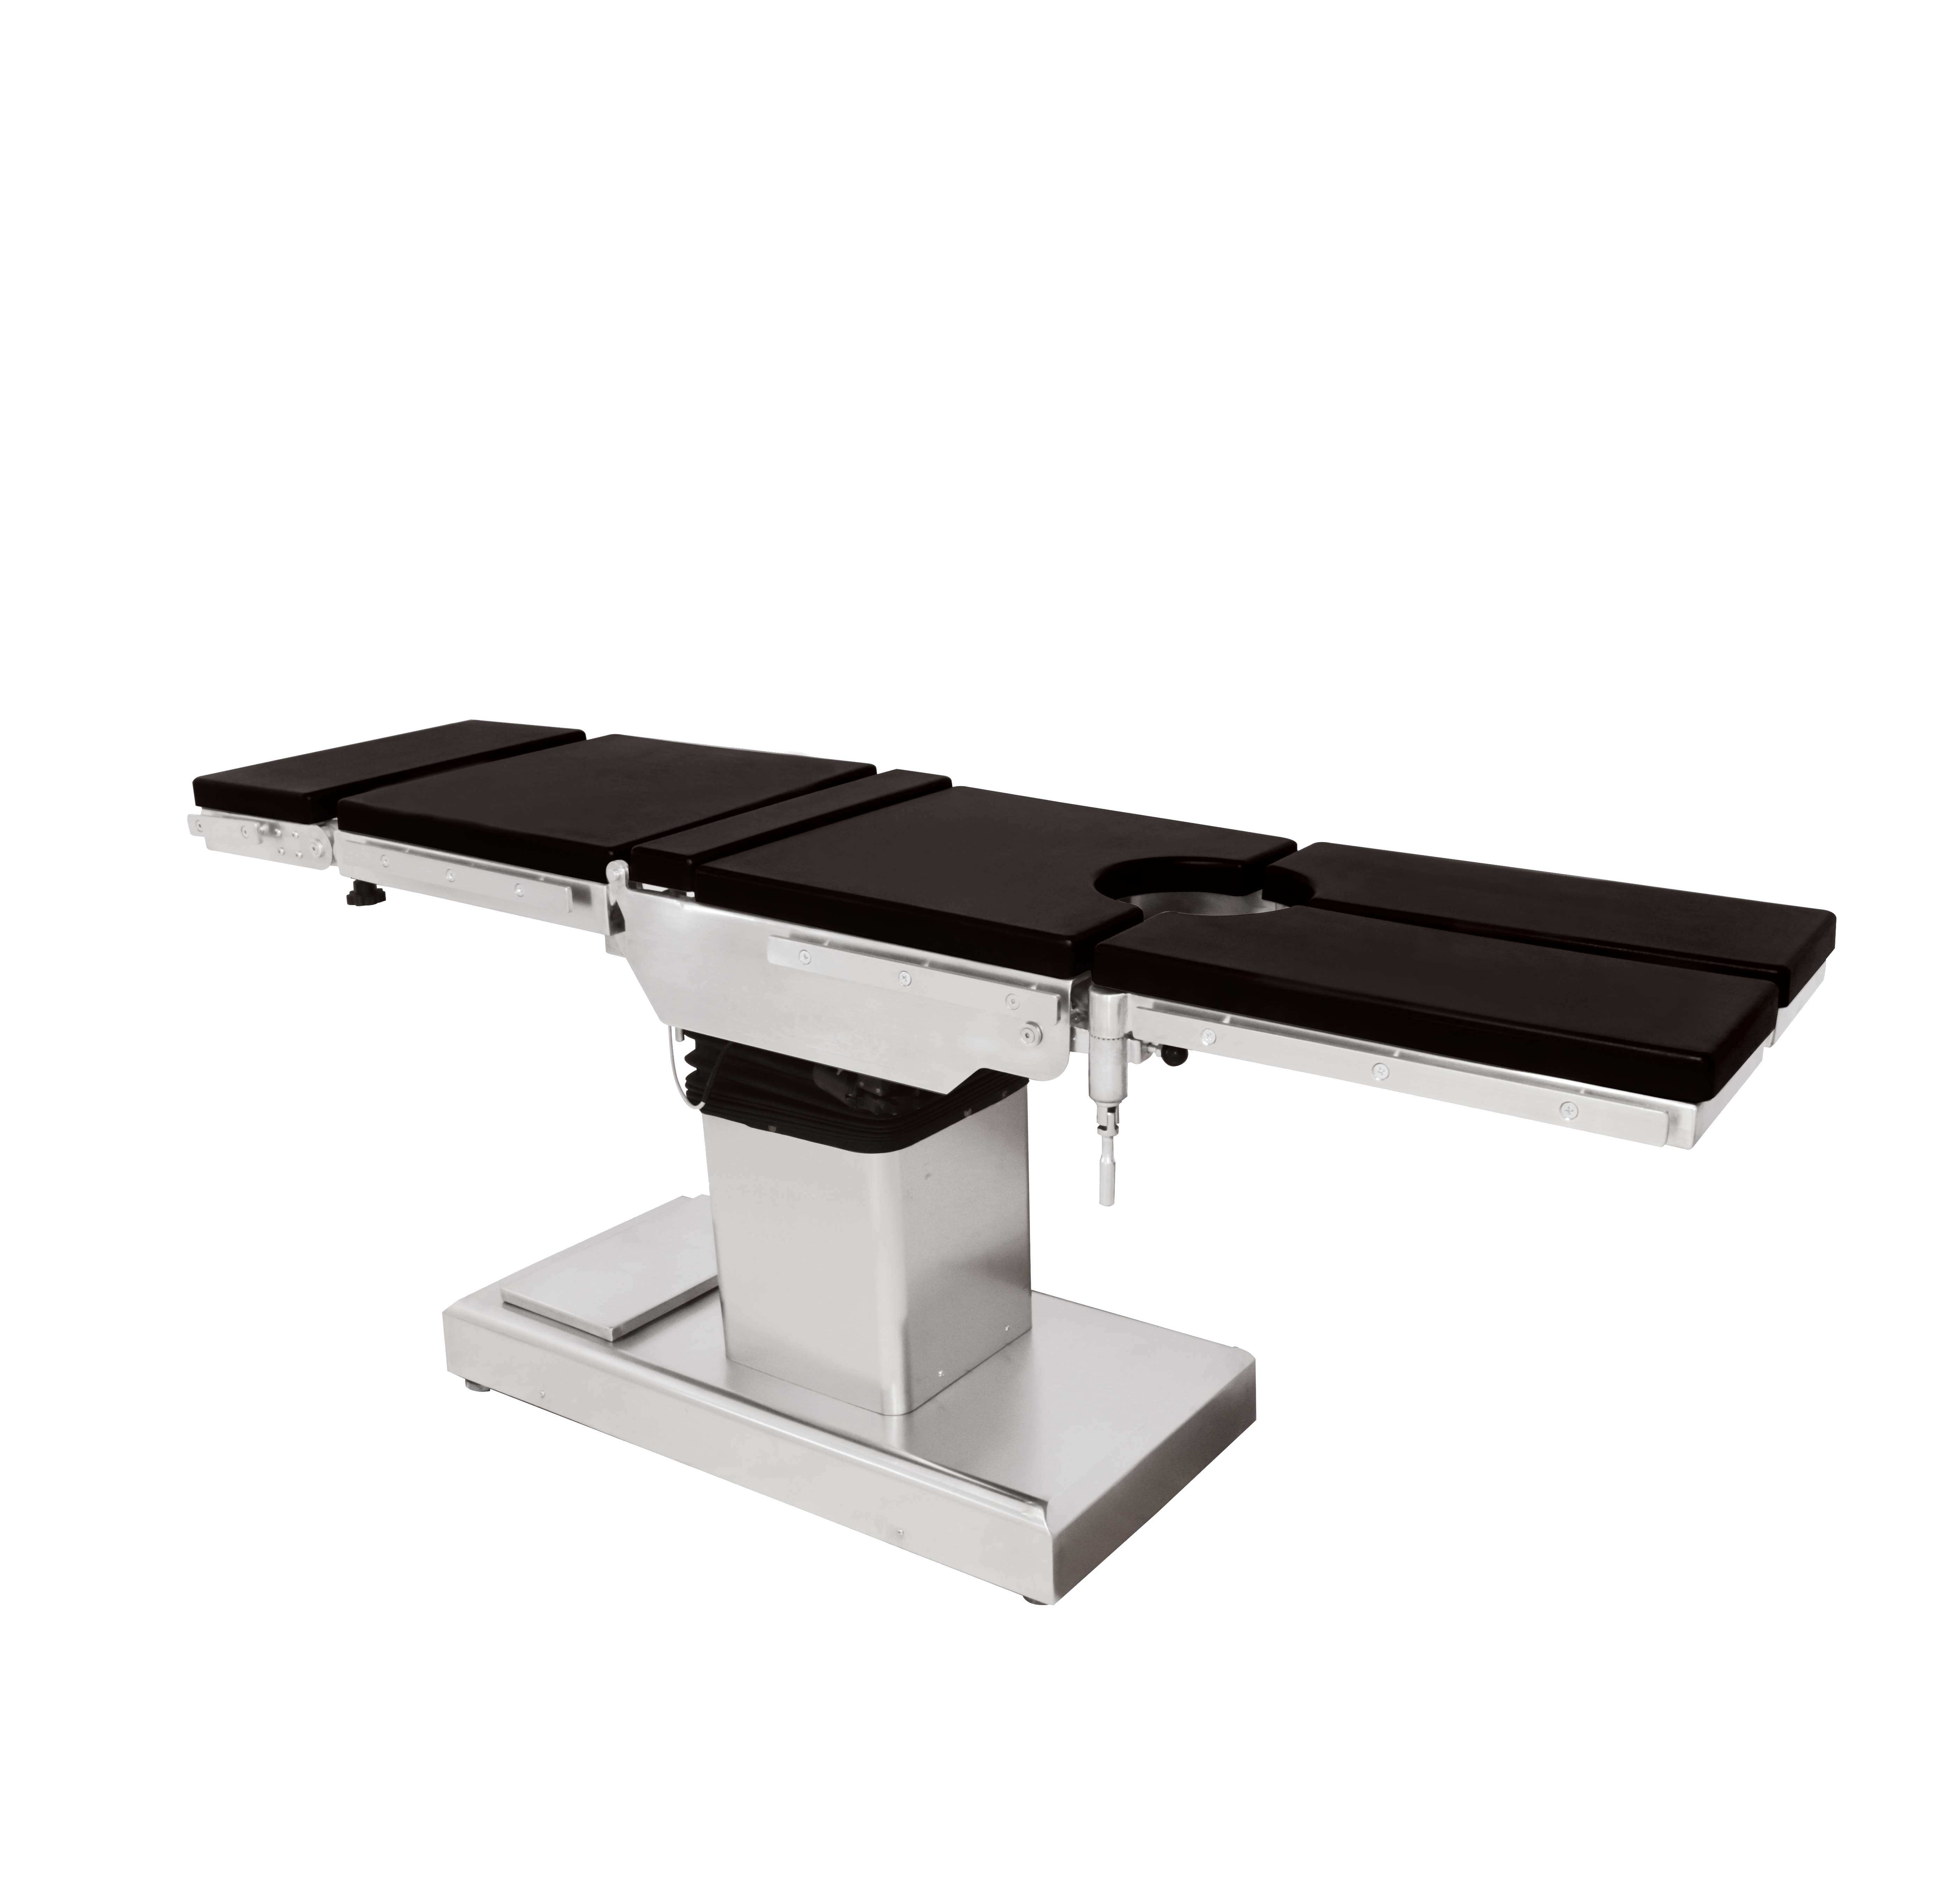 MEDICAL Equipment Electric multi-purpose Operating stainless steel Table DT-2A for Theater Room Surgical